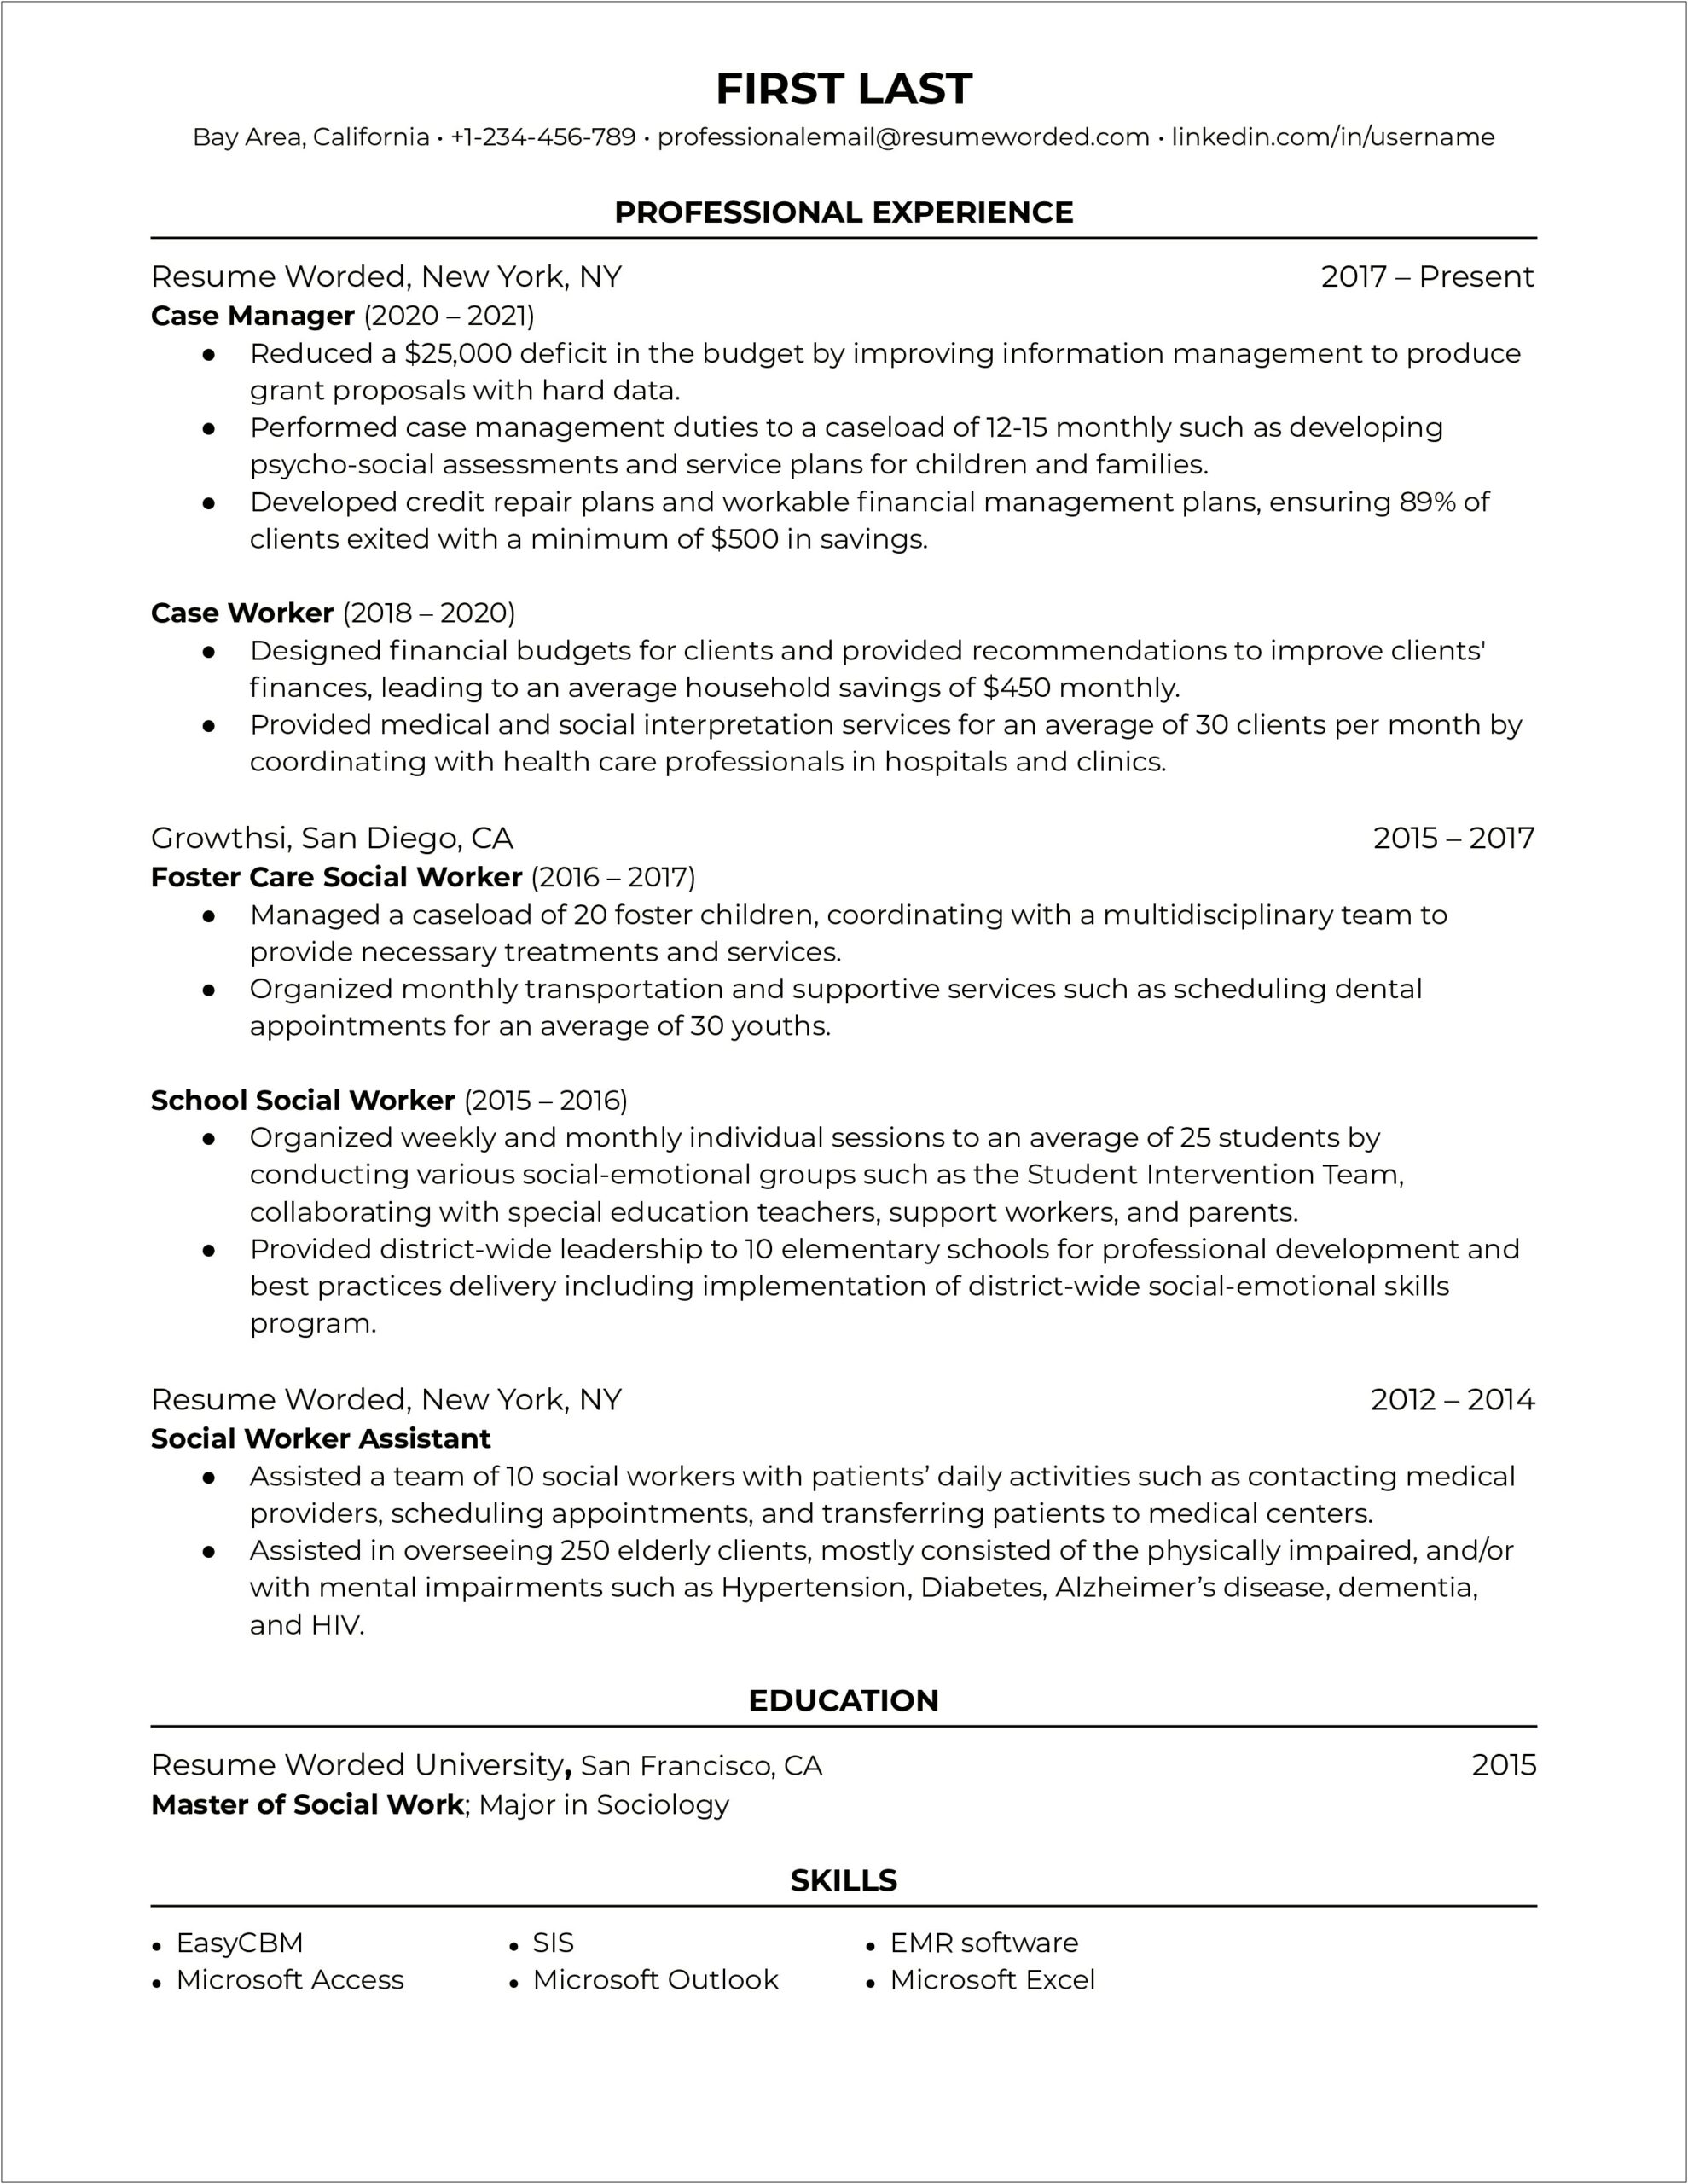 Case Manager Job Duties For Resume